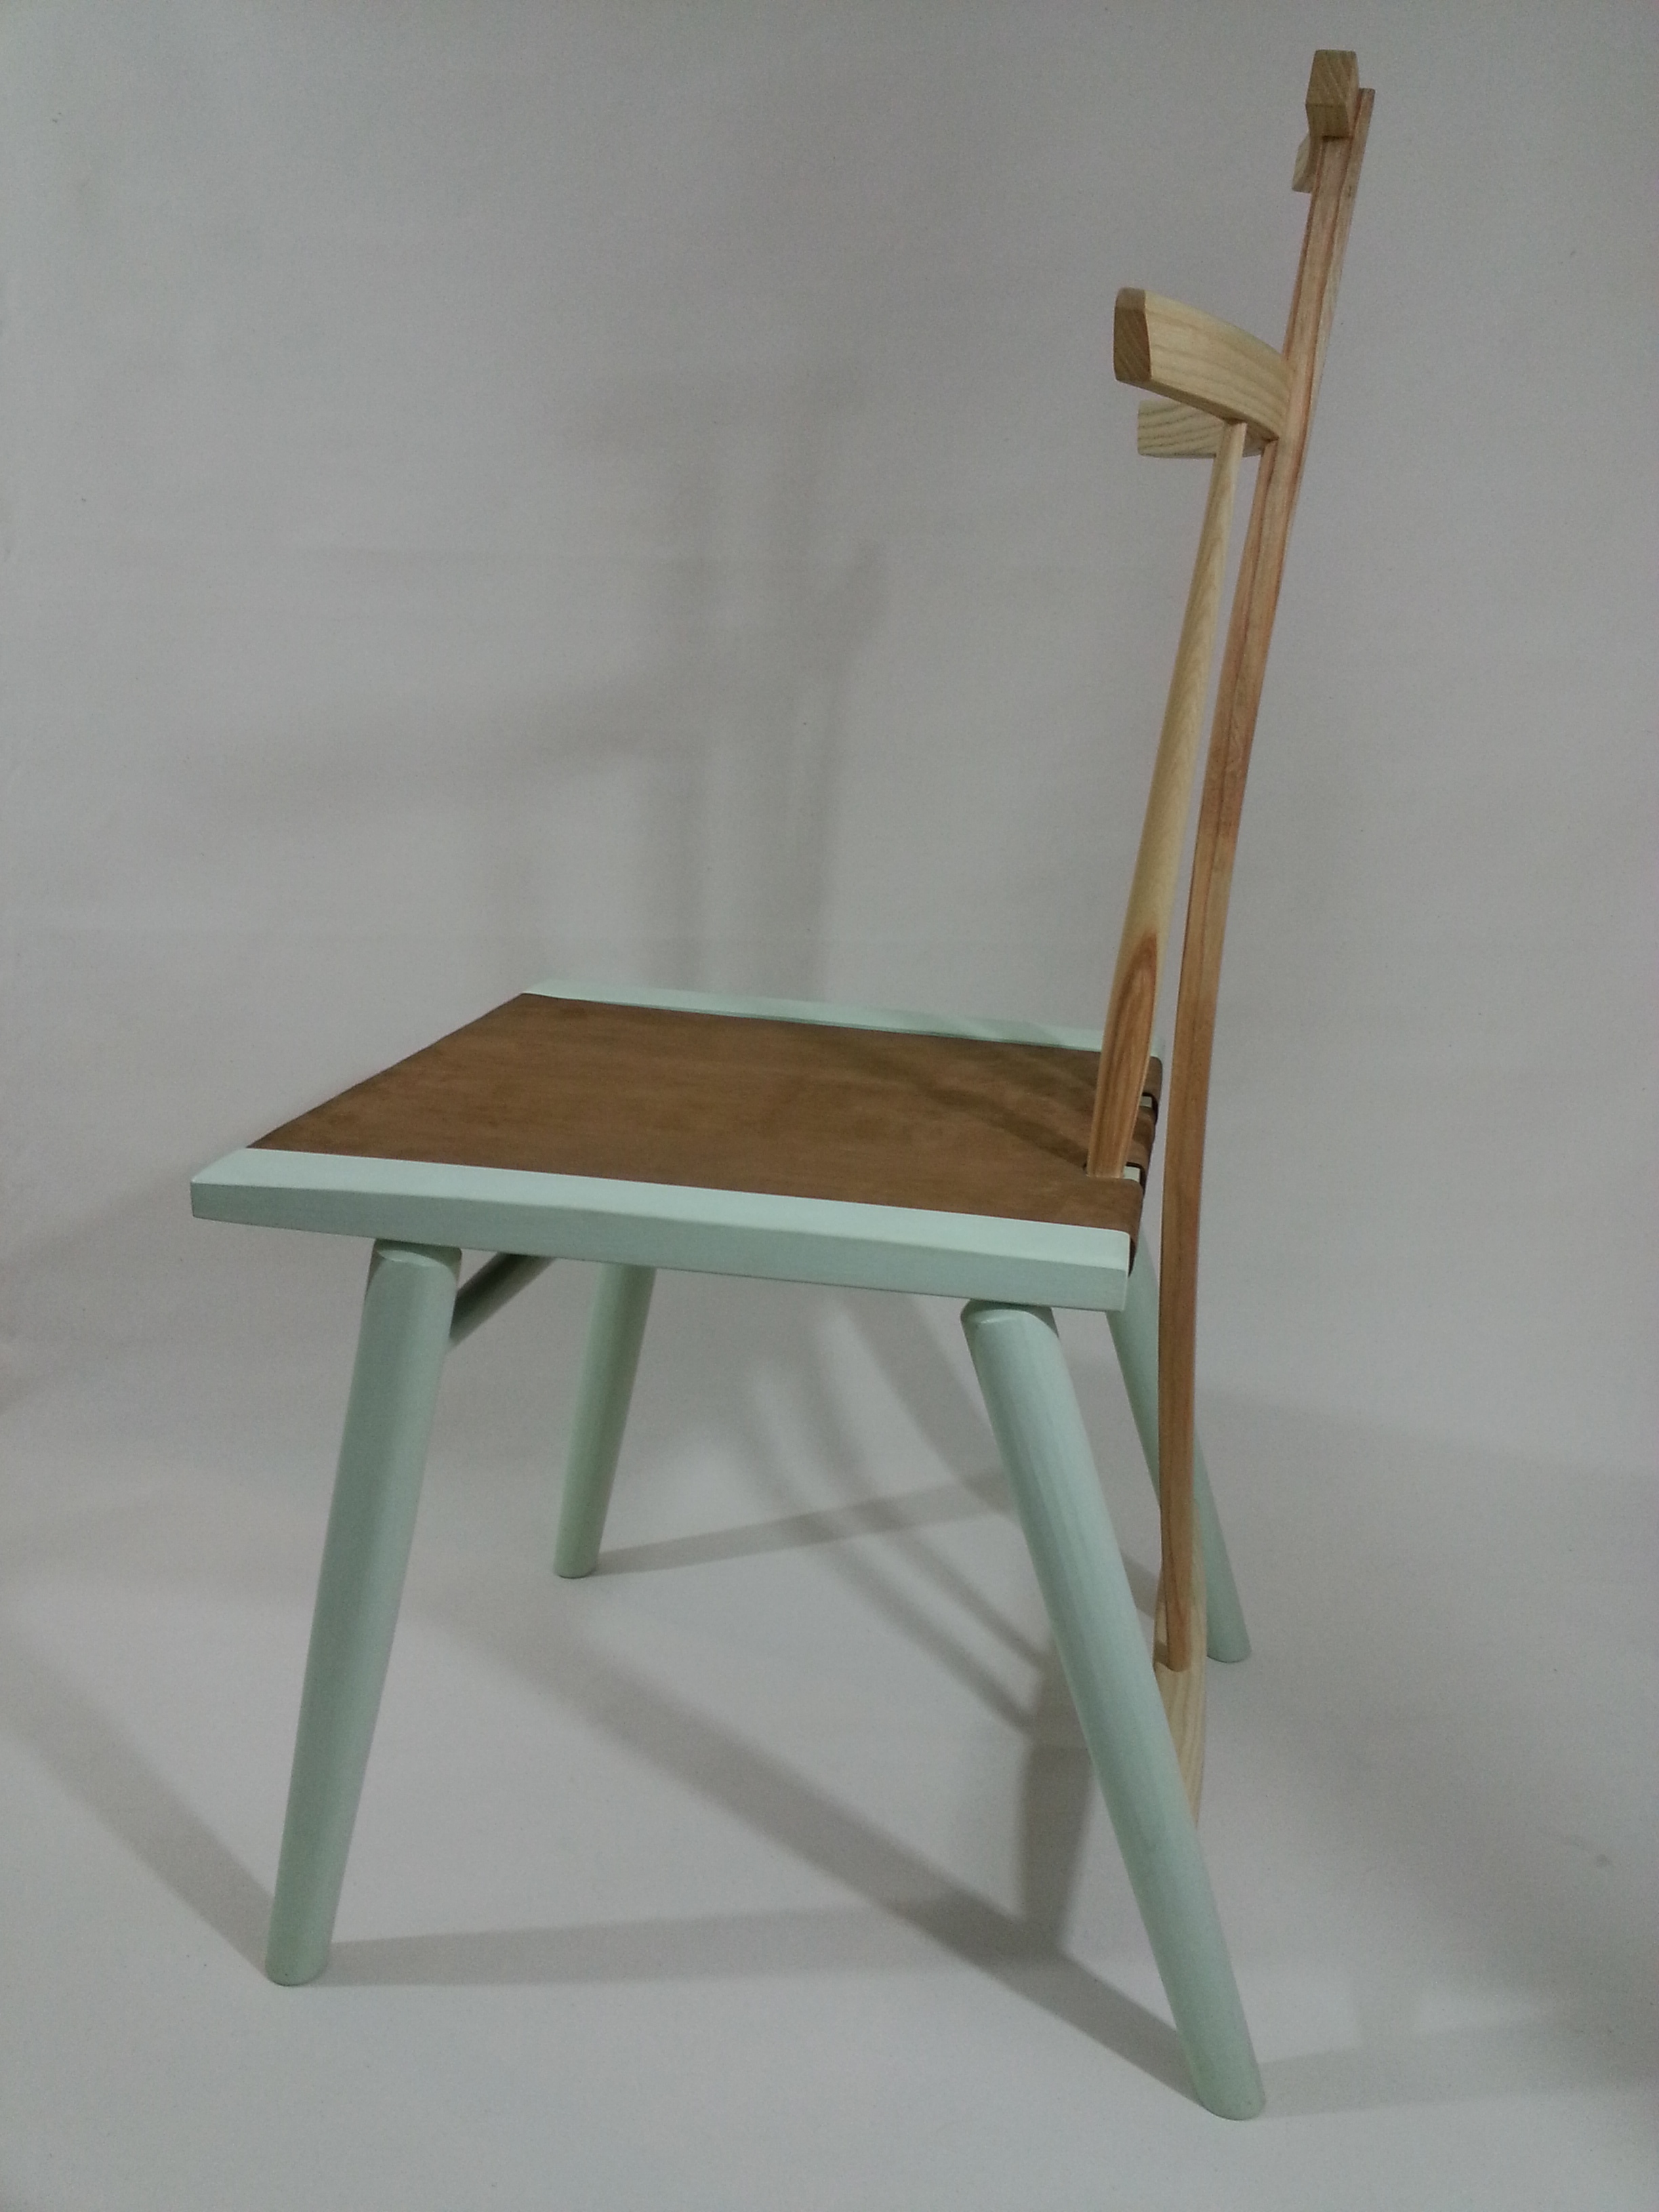 "The Ashby Chair"